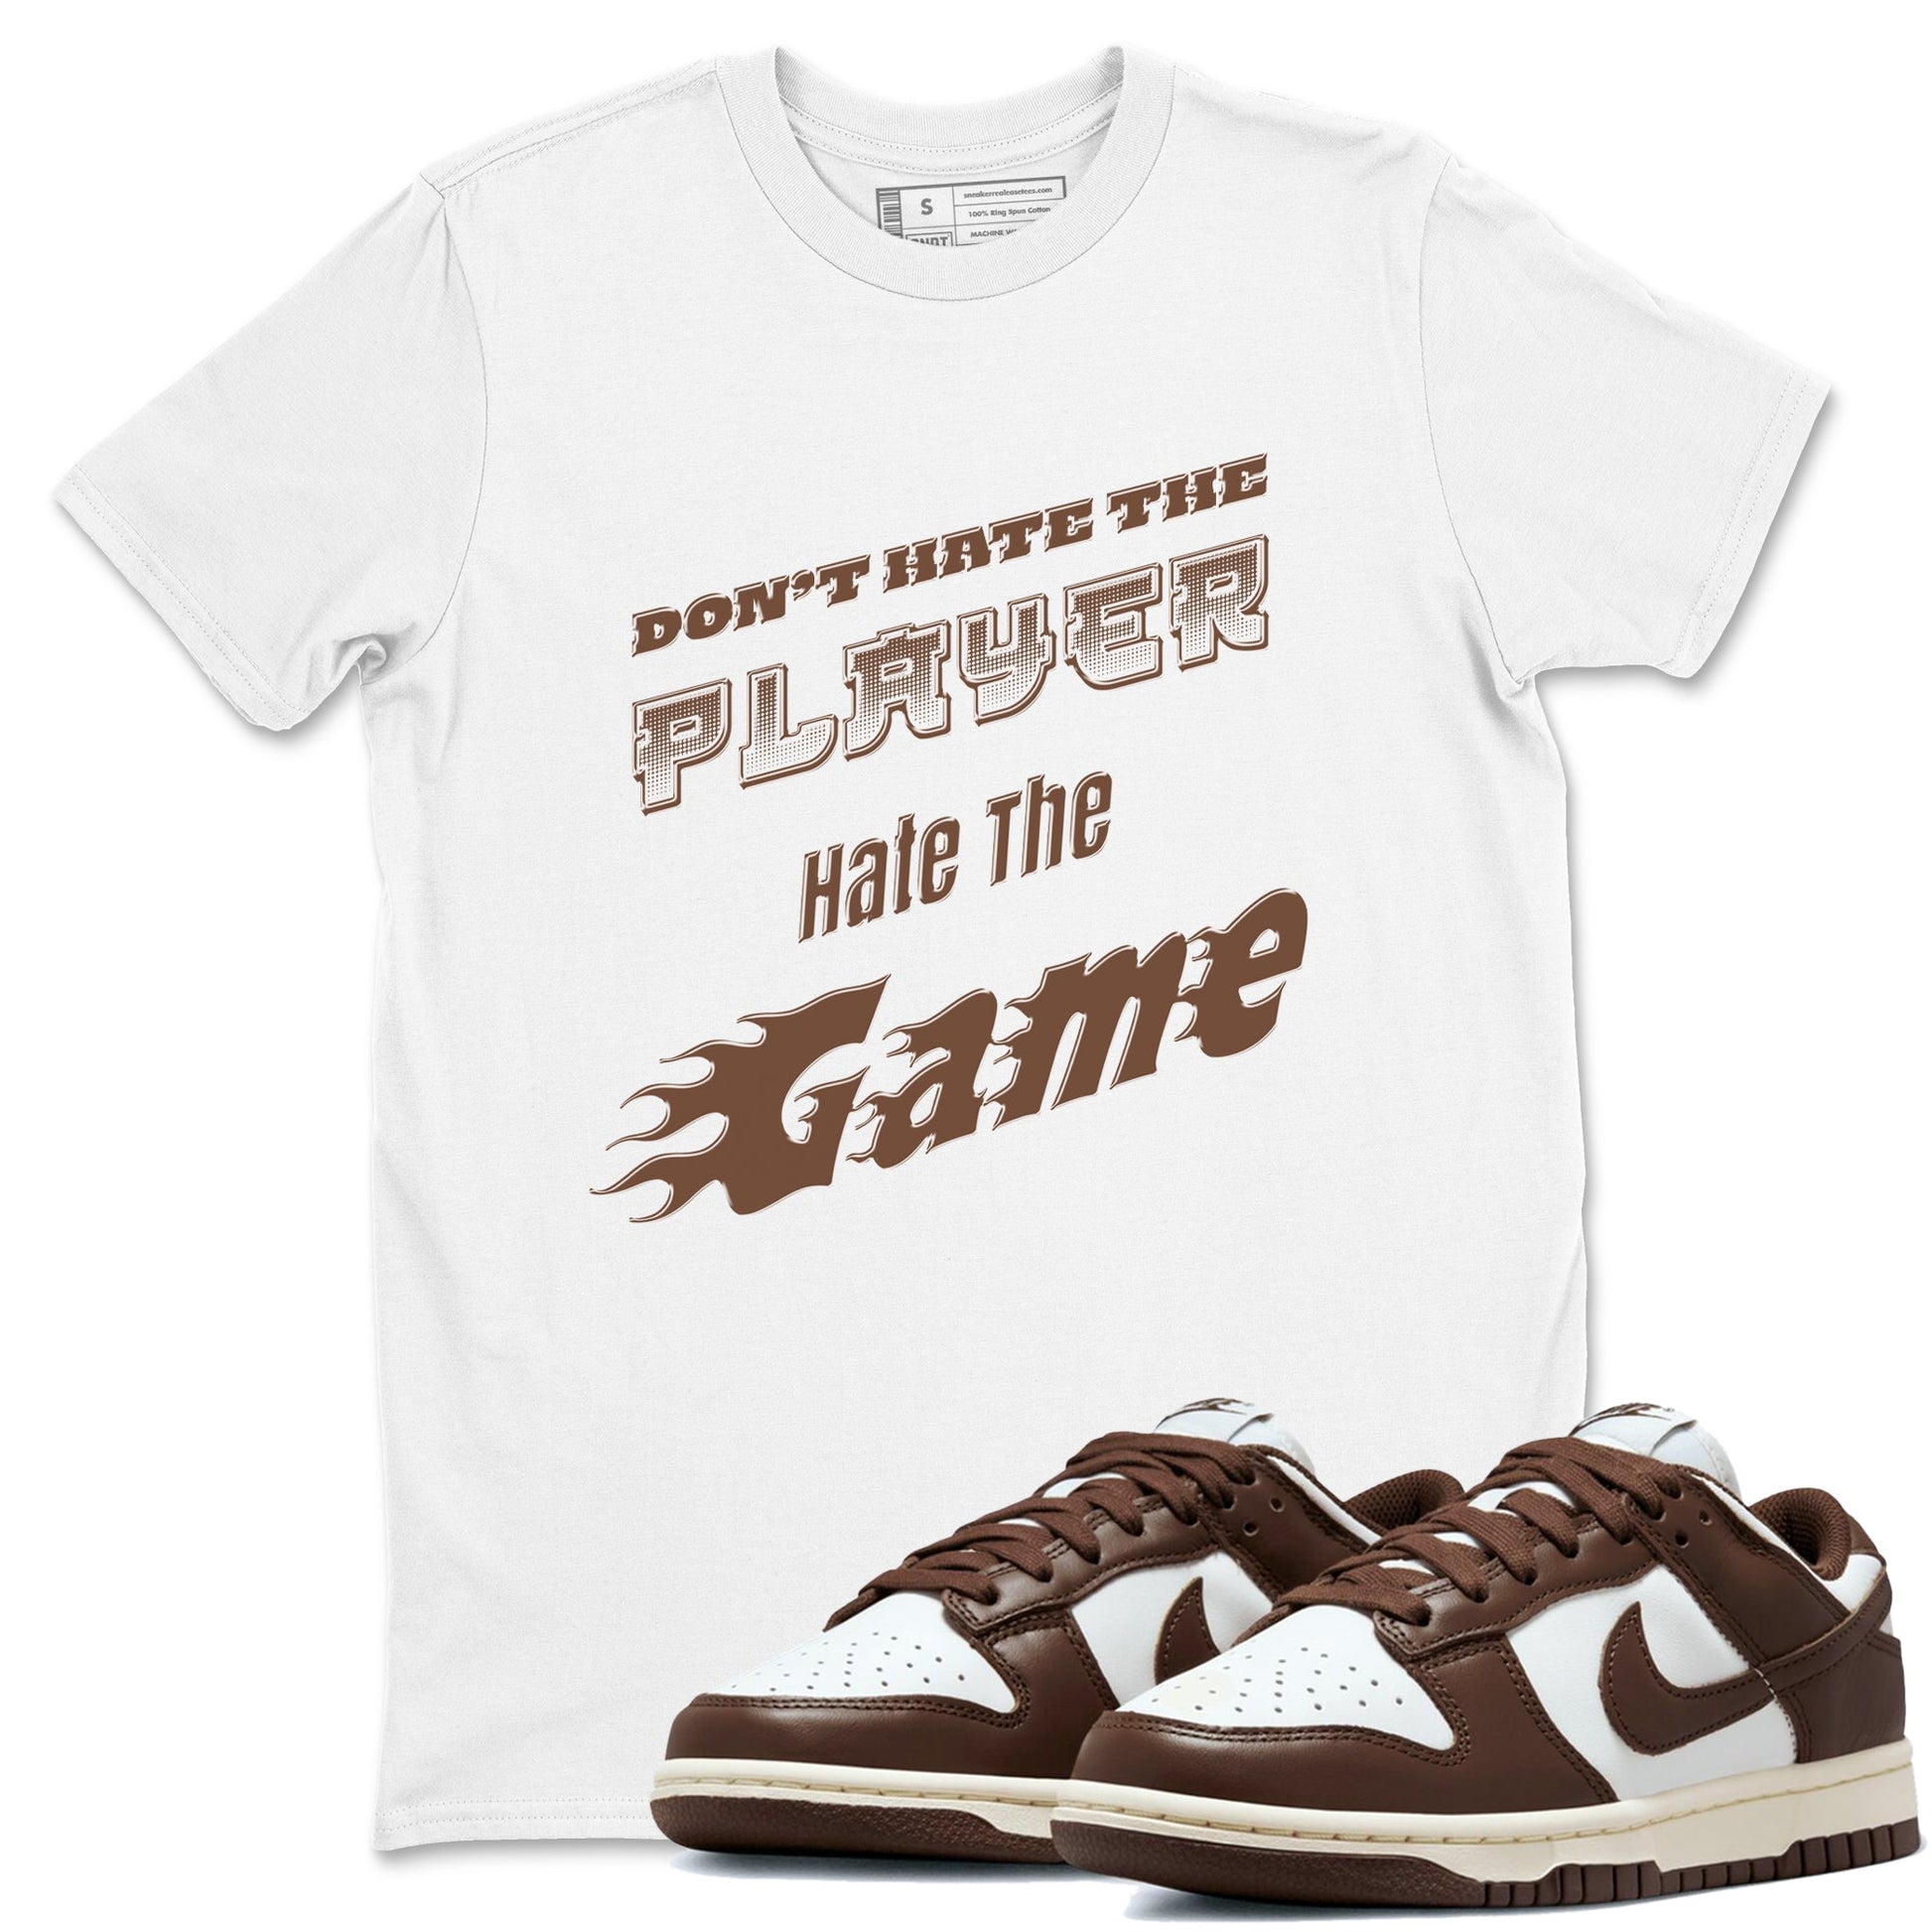 Dunk Cacao Wow shirt to match jordans Don't Hate The Player sneaker tees Dunk Cacao Wow SNRT Sneaker Release Tees Unisex White 1 T-Shirt